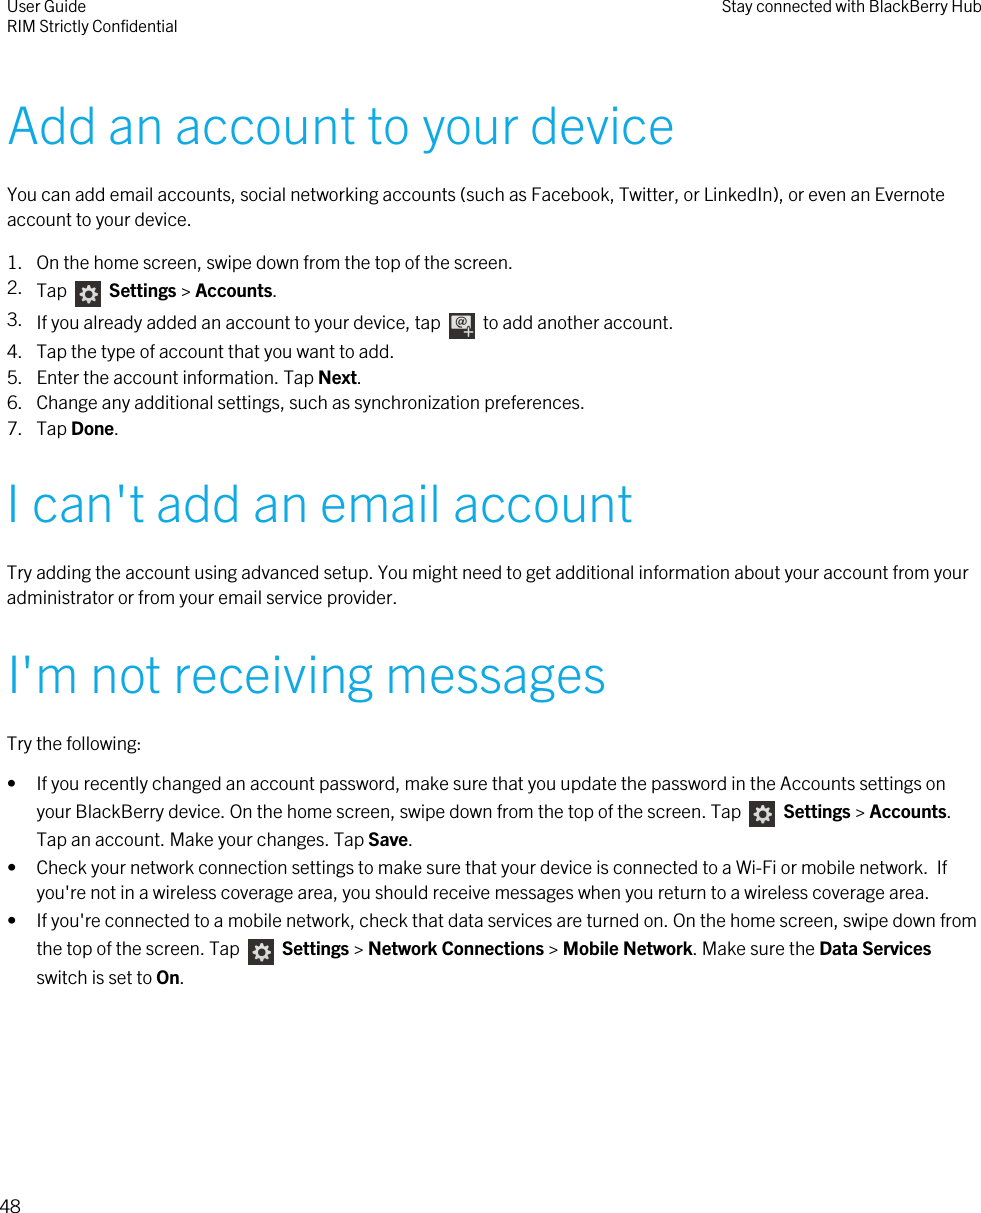 Add an account to your deviceYou can add email accounts, social networking accounts (such as Facebook, Twitter, or LinkedIn), or even an Evernoteaccount to your device.1. On the home screen, swipe down from the top of the screen.2. Tap   Settings &gt; Accounts.3. If you already added an account to your device, tap    to add another account.4. Tap the type of account that you want to add.5. Enter the account information. Tap Next.6. Change any additional settings, such as synchronization preferences.7. Tap Done.I can&apos;t add an email accountTry adding the account using advanced setup. You might need to get additional information about your account from youradministrator or from your email service provider.I&apos;m not receiving messagesTry the following:• If you recently changed an account password, make sure that you update the password in the Accounts settings onyour BlackBerry device. On the home screen, swipe down from the top of the screen. Tap   Settings &gt; Accounts.Tap an account. Make your changes. Tap Save.• Check your network connection settings to make sure that your device is connected to a Wi-Fi or mobile network.  Ifyou&apos;re not in a wireless coverage area, you should receive messages when you return to a wireless coverage area.• If you&apos;re connected to a mobile network, check that data services are turned on. On the home screen, swipe down fromthe top of the screen. Tap    Settings &gt; Network Connections &gt; Mobile Network. Make sure the Data Servicesswitch is set to On.User GuideRIM Strictly Confidential Stay connected with BlackBerry Hub48